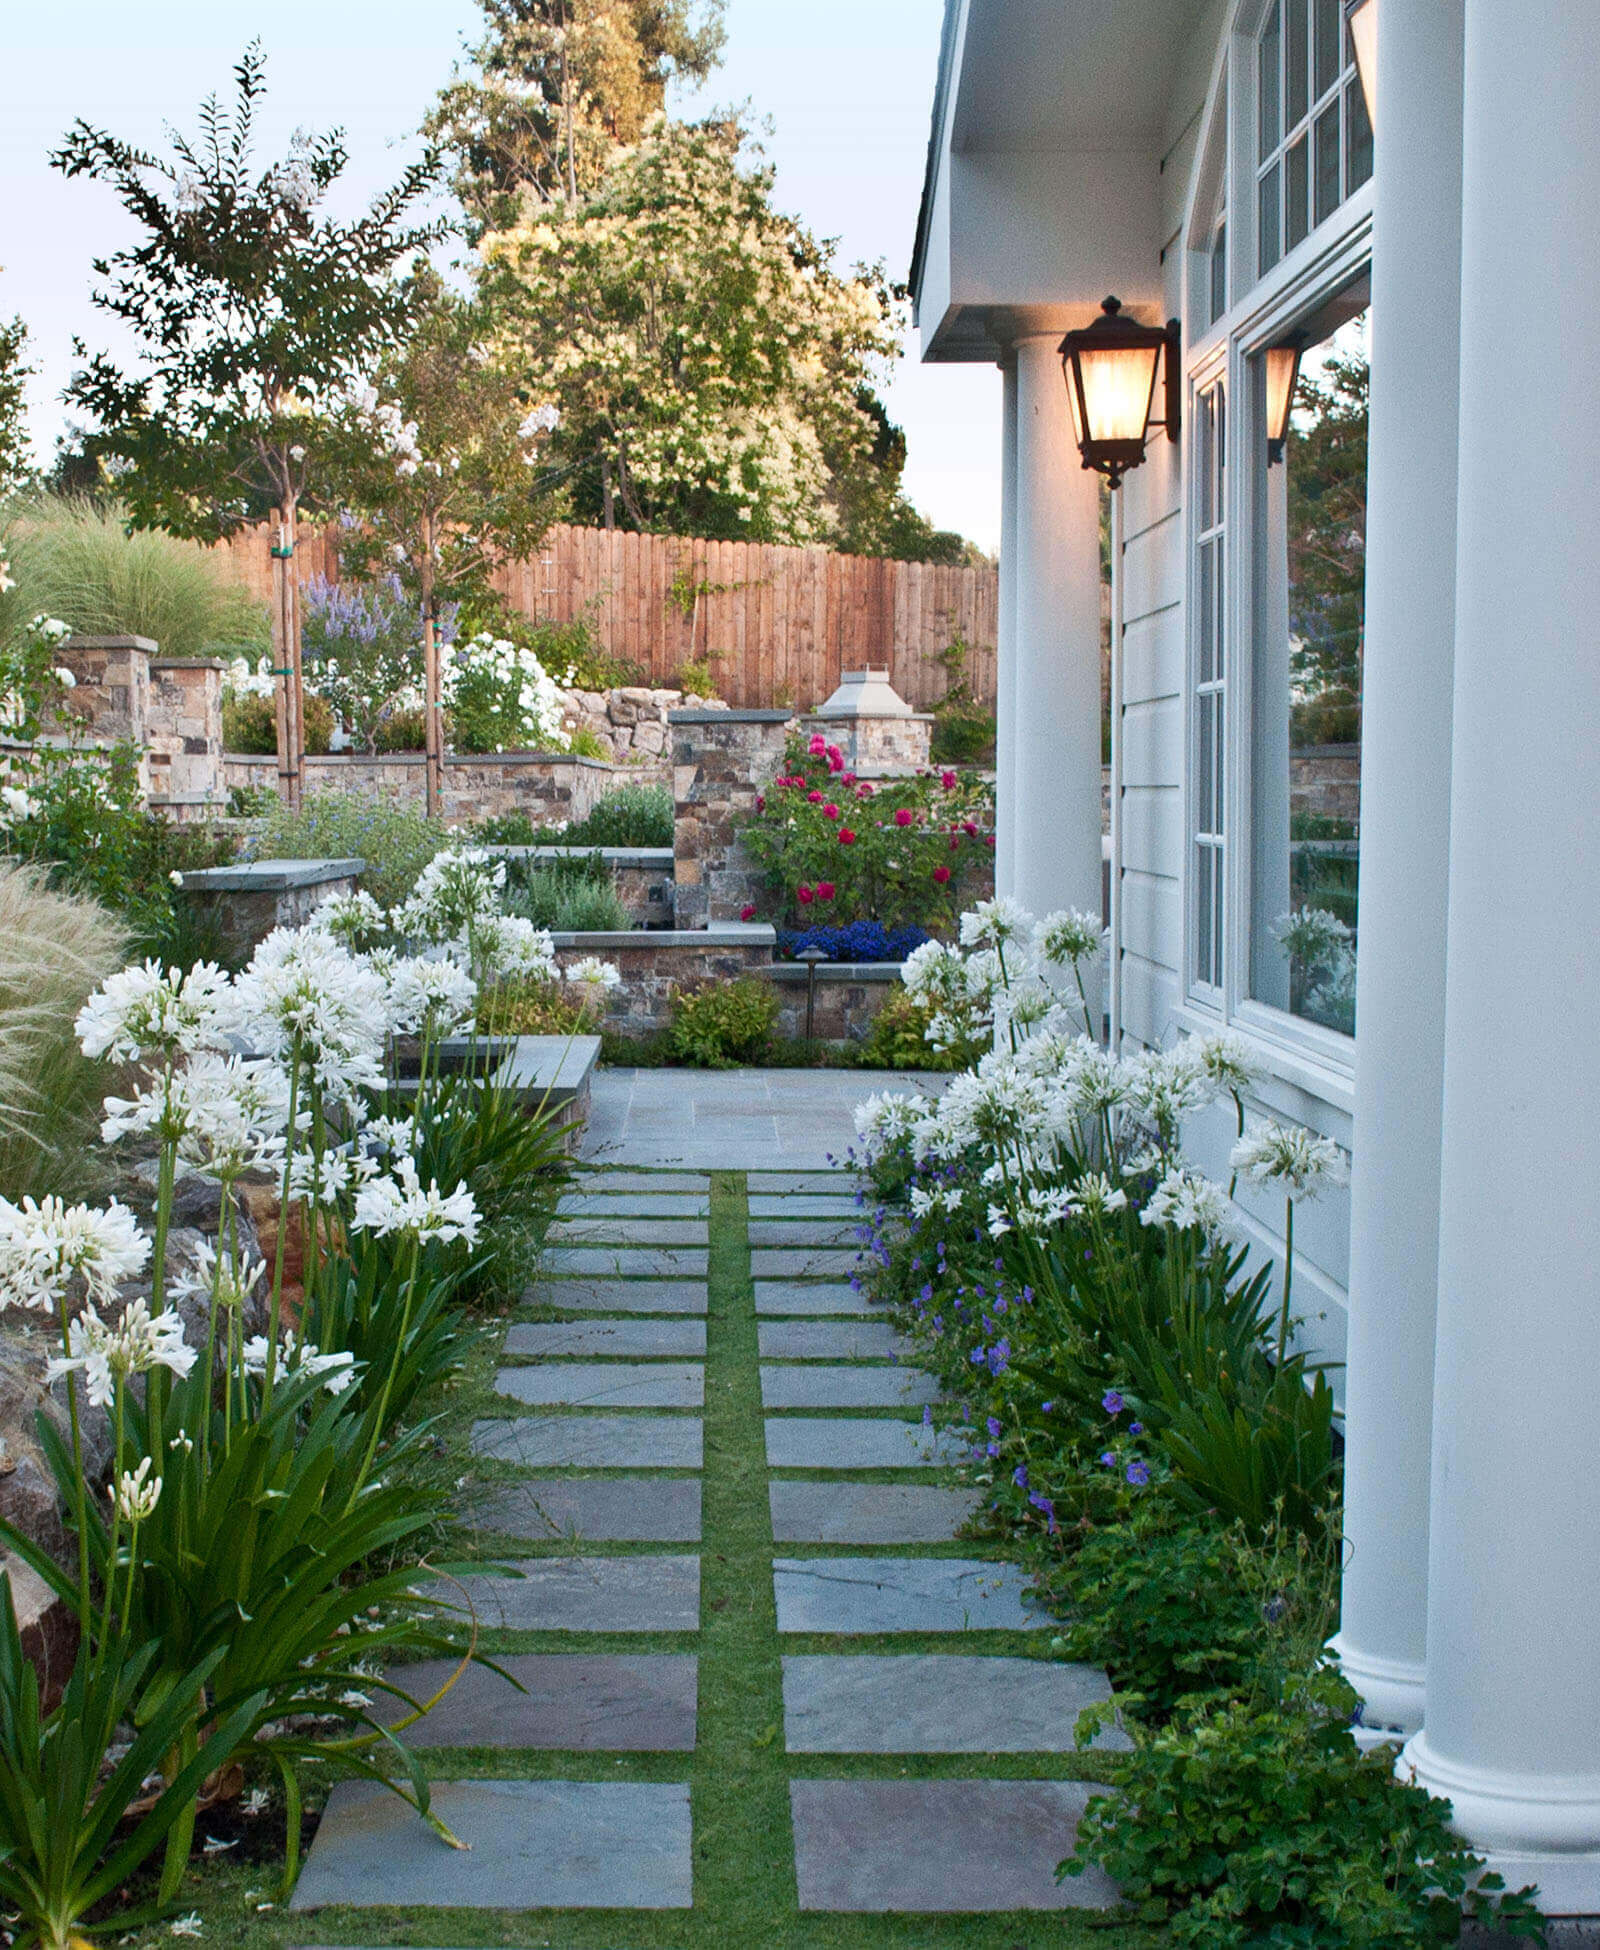 two row square tile walkway leading through side yard, lined with flowering plants